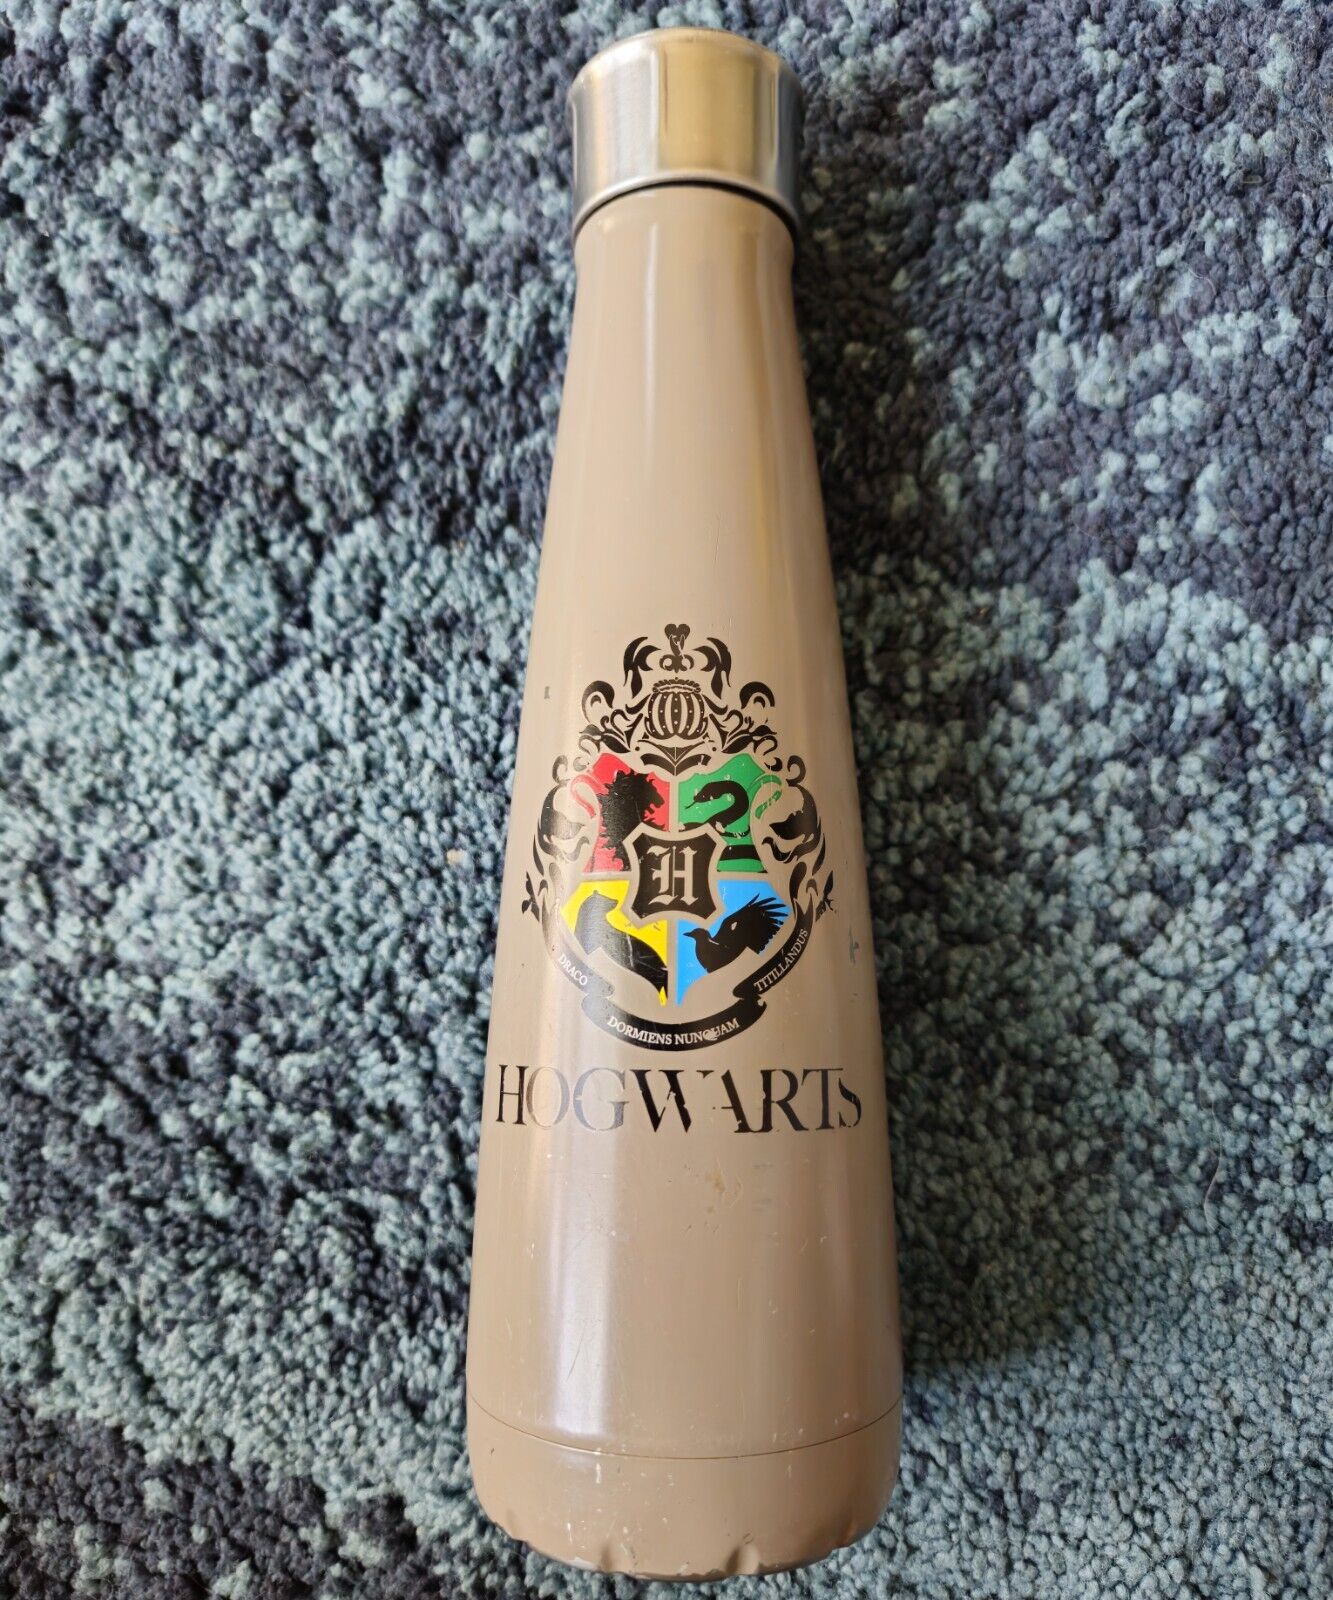 Hogwarts Sip by Swell 15 oz Metal Water Bottle Harry Potter Logo Stainless Steel